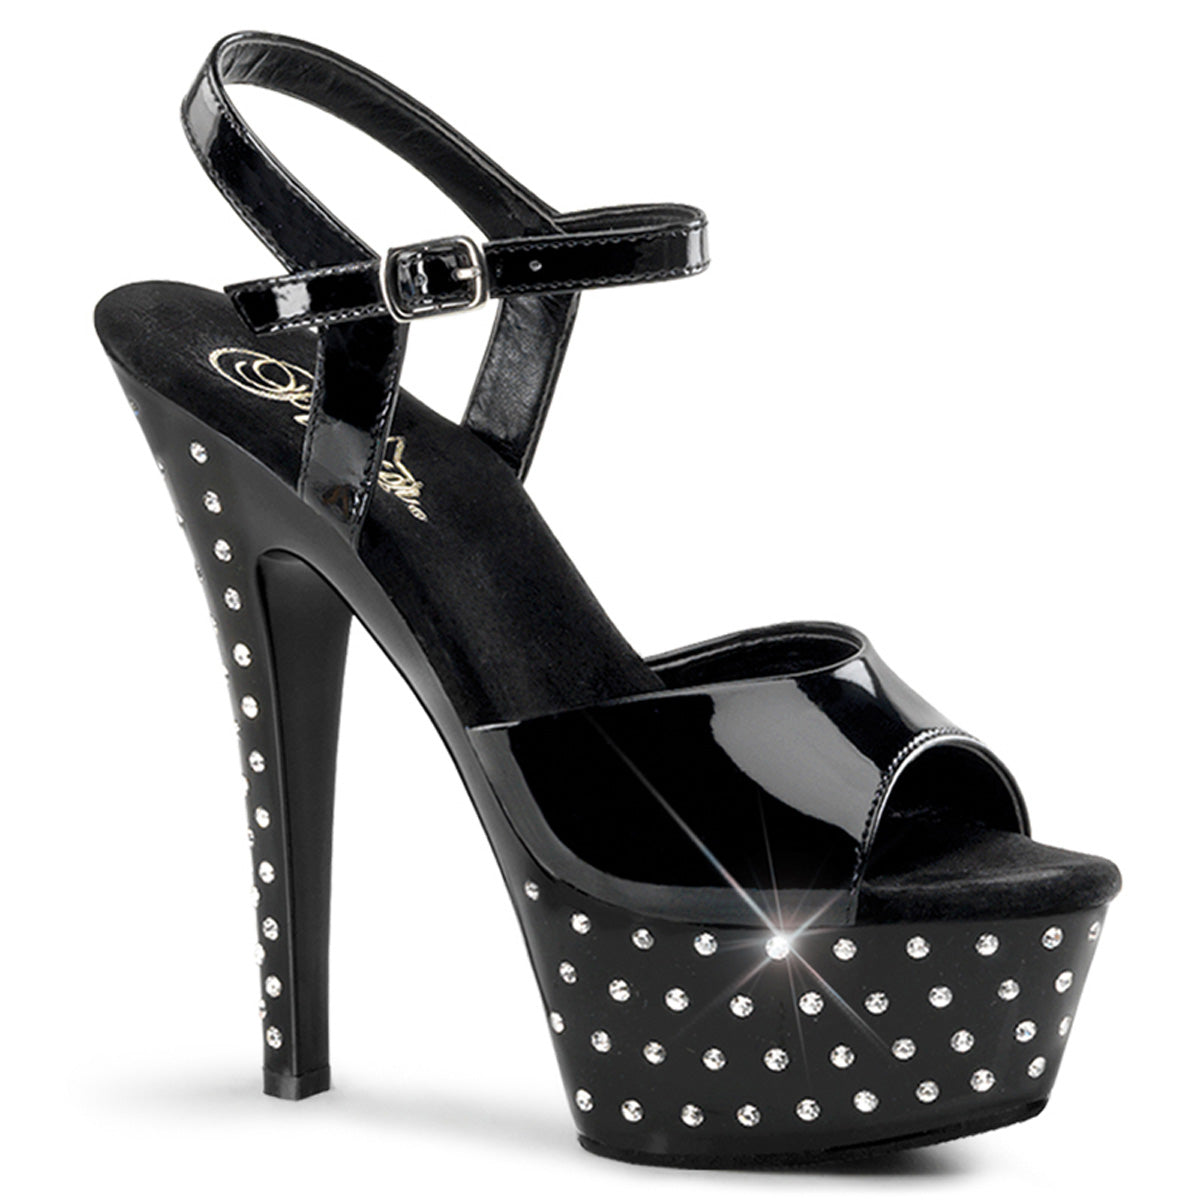 STARDUST-609 6 Inch Heel Black Patent Pole Dancing Platforms-Pleaser- Sexy Shoes